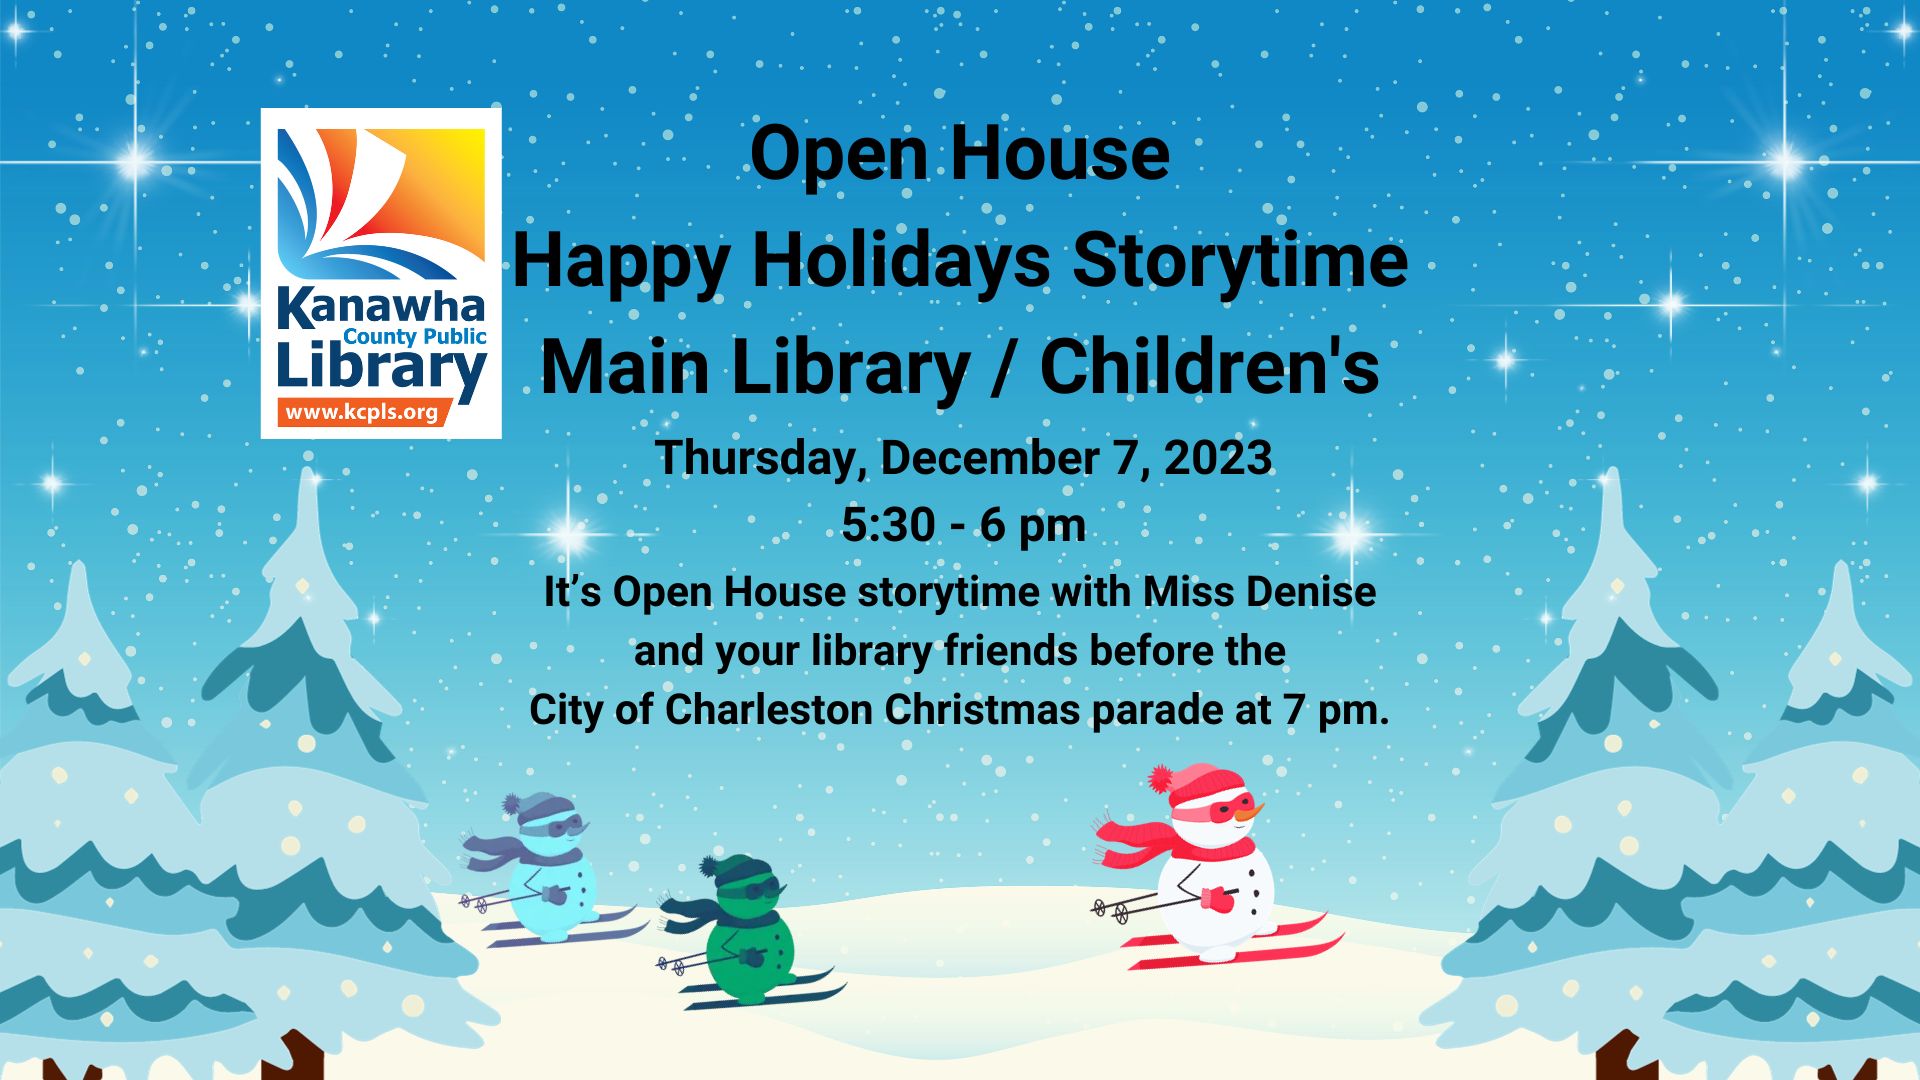 Open House Happy Holidays Storytime